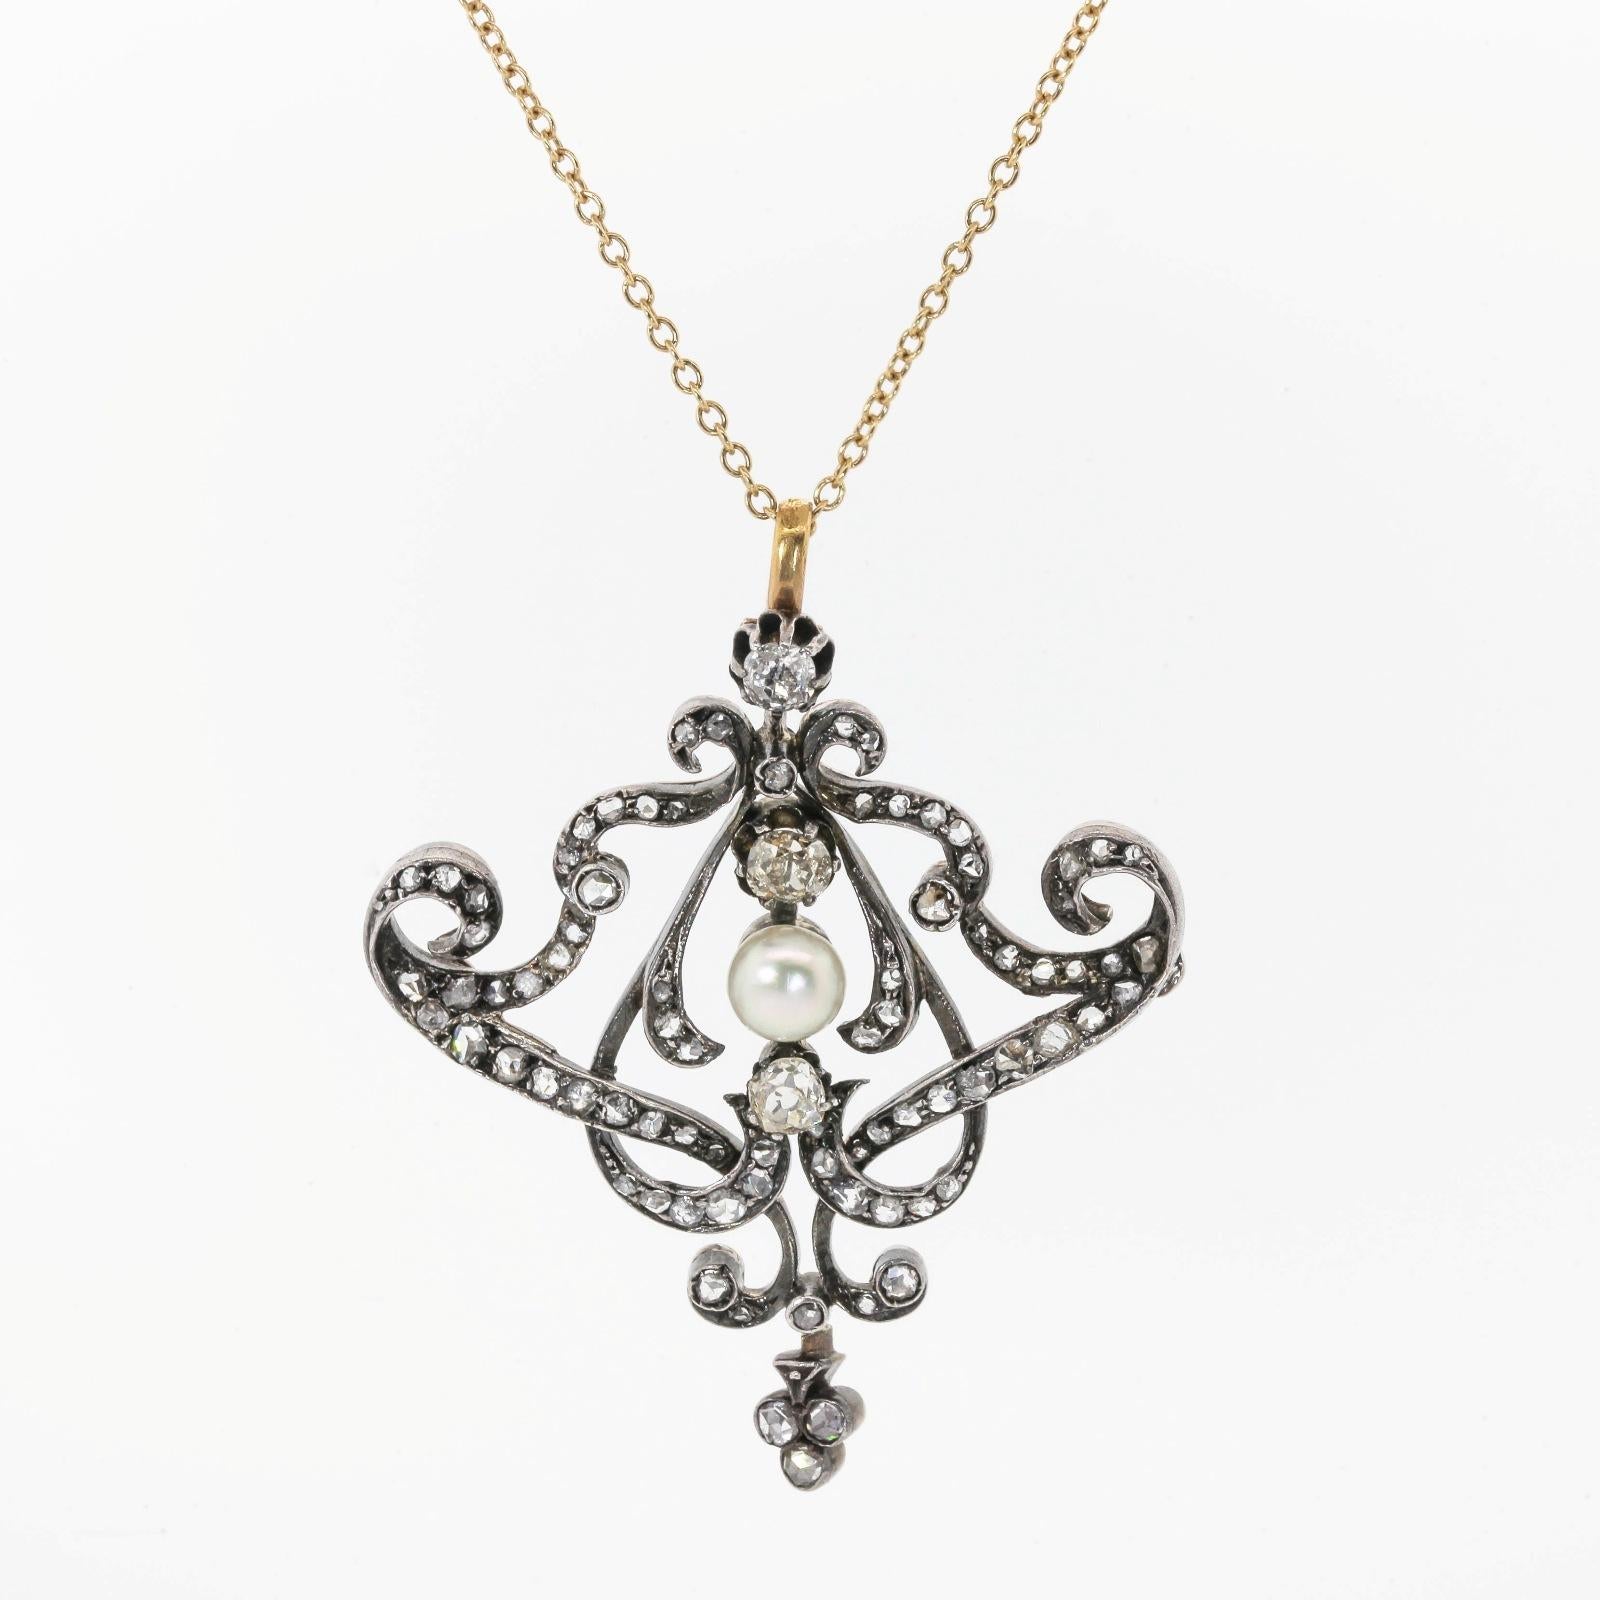 A gorgeous 1860s pendant immaculately crafted in Silver and 18KT yellow gold.  The pendant is  designed of flowing curves, accented with three Old Mine Cut Diamonds and a natural white Pearl at the center.  Rose Cut Diamonds dress up the rest of